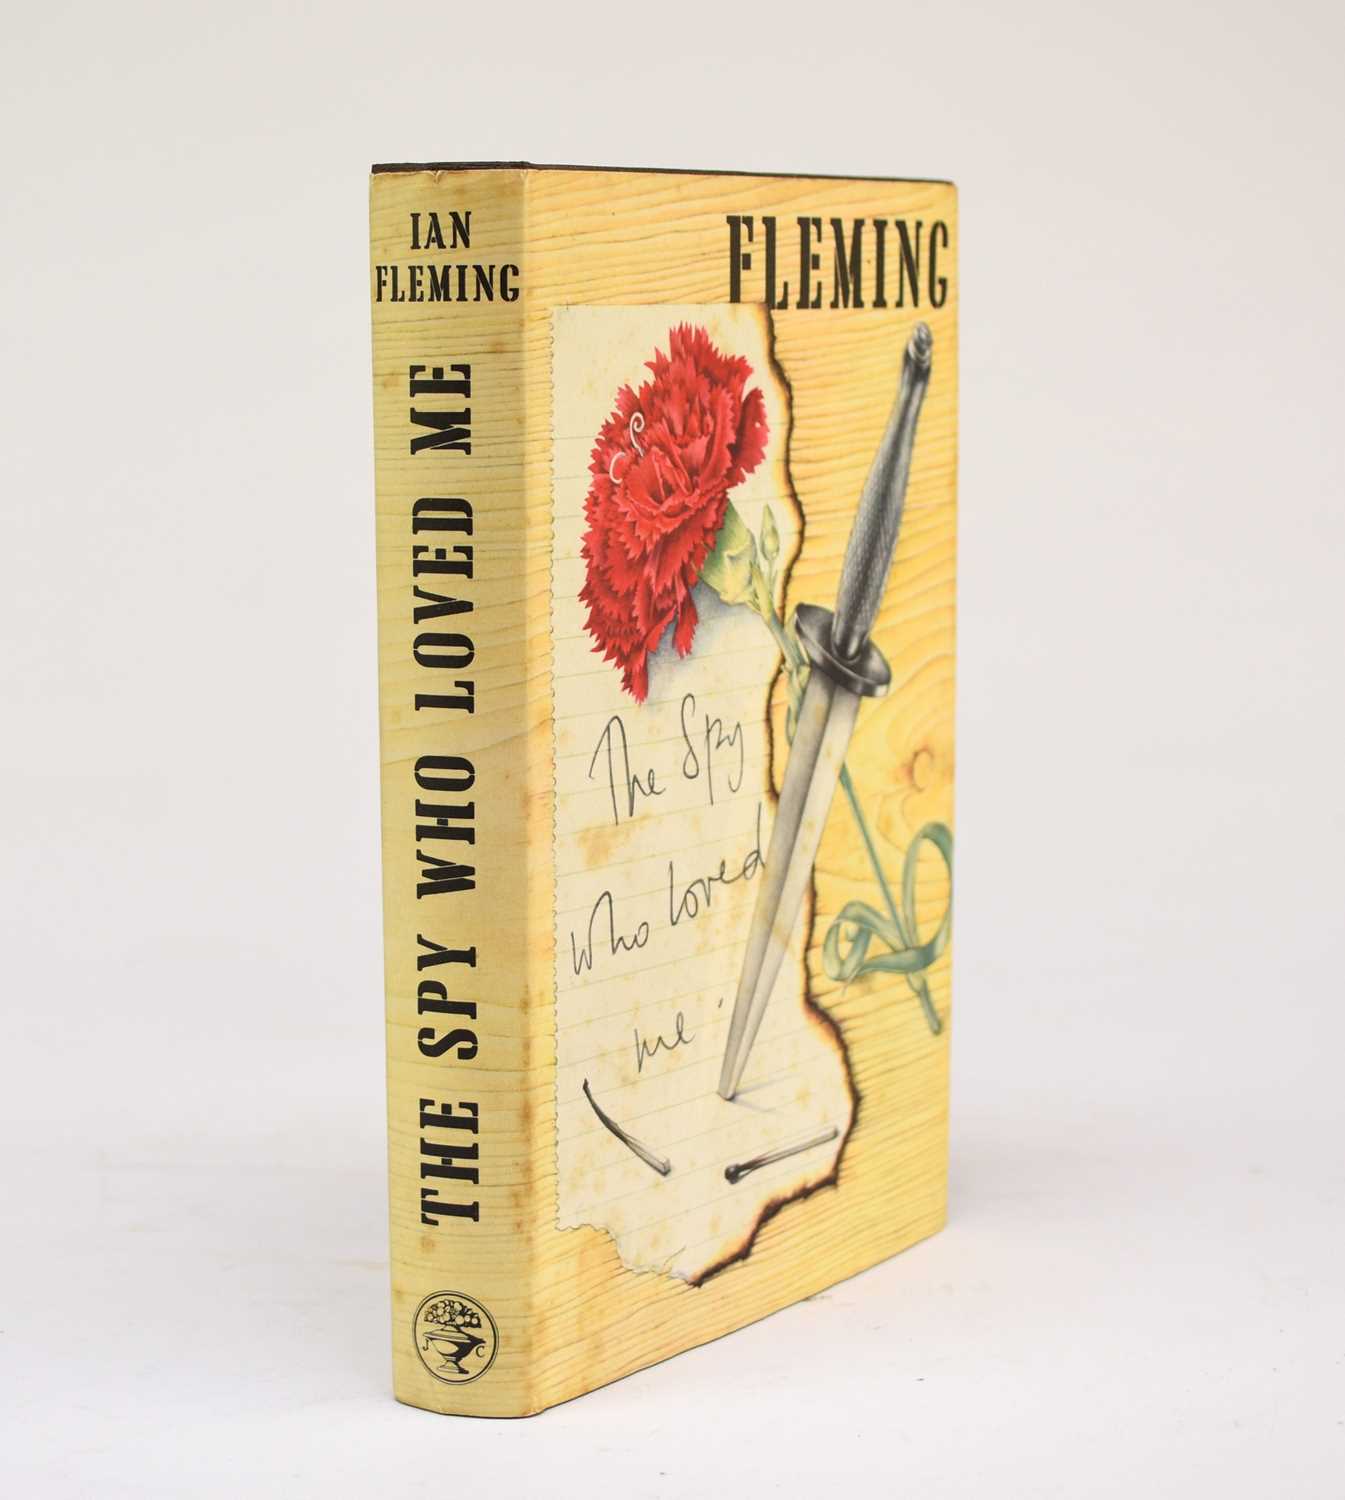 Lot 1017 - FLEMING, Ian, The Spy Who Loved Me, First edition, Jonathan Cape, 1962